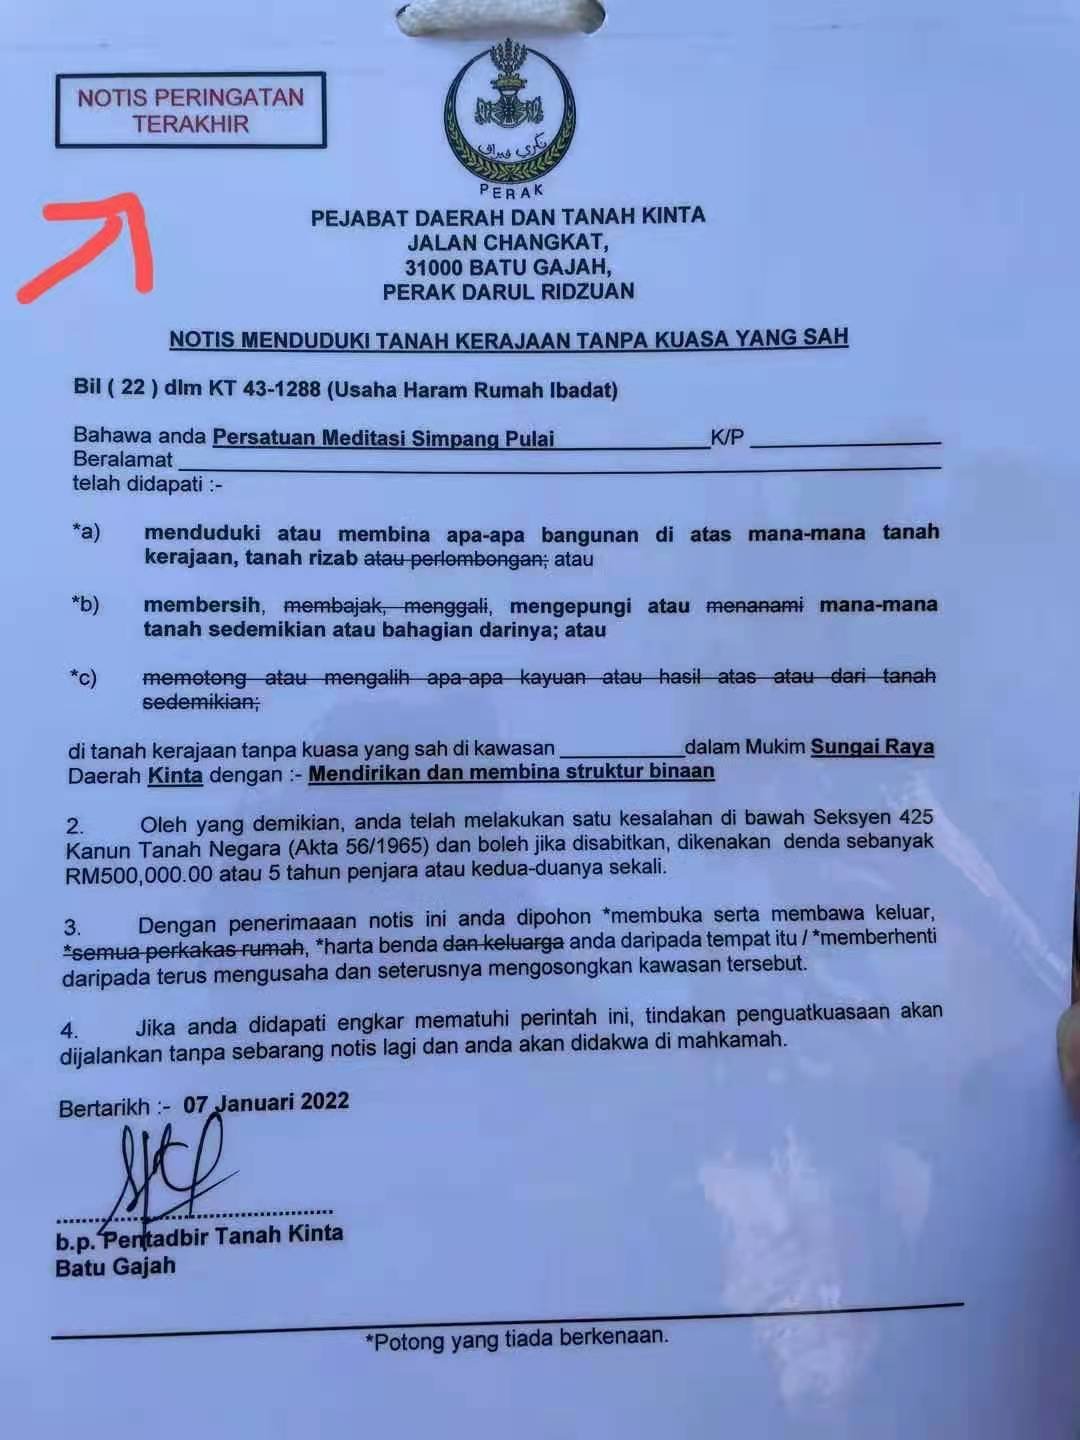 The notice that was issued to cave temple operators.